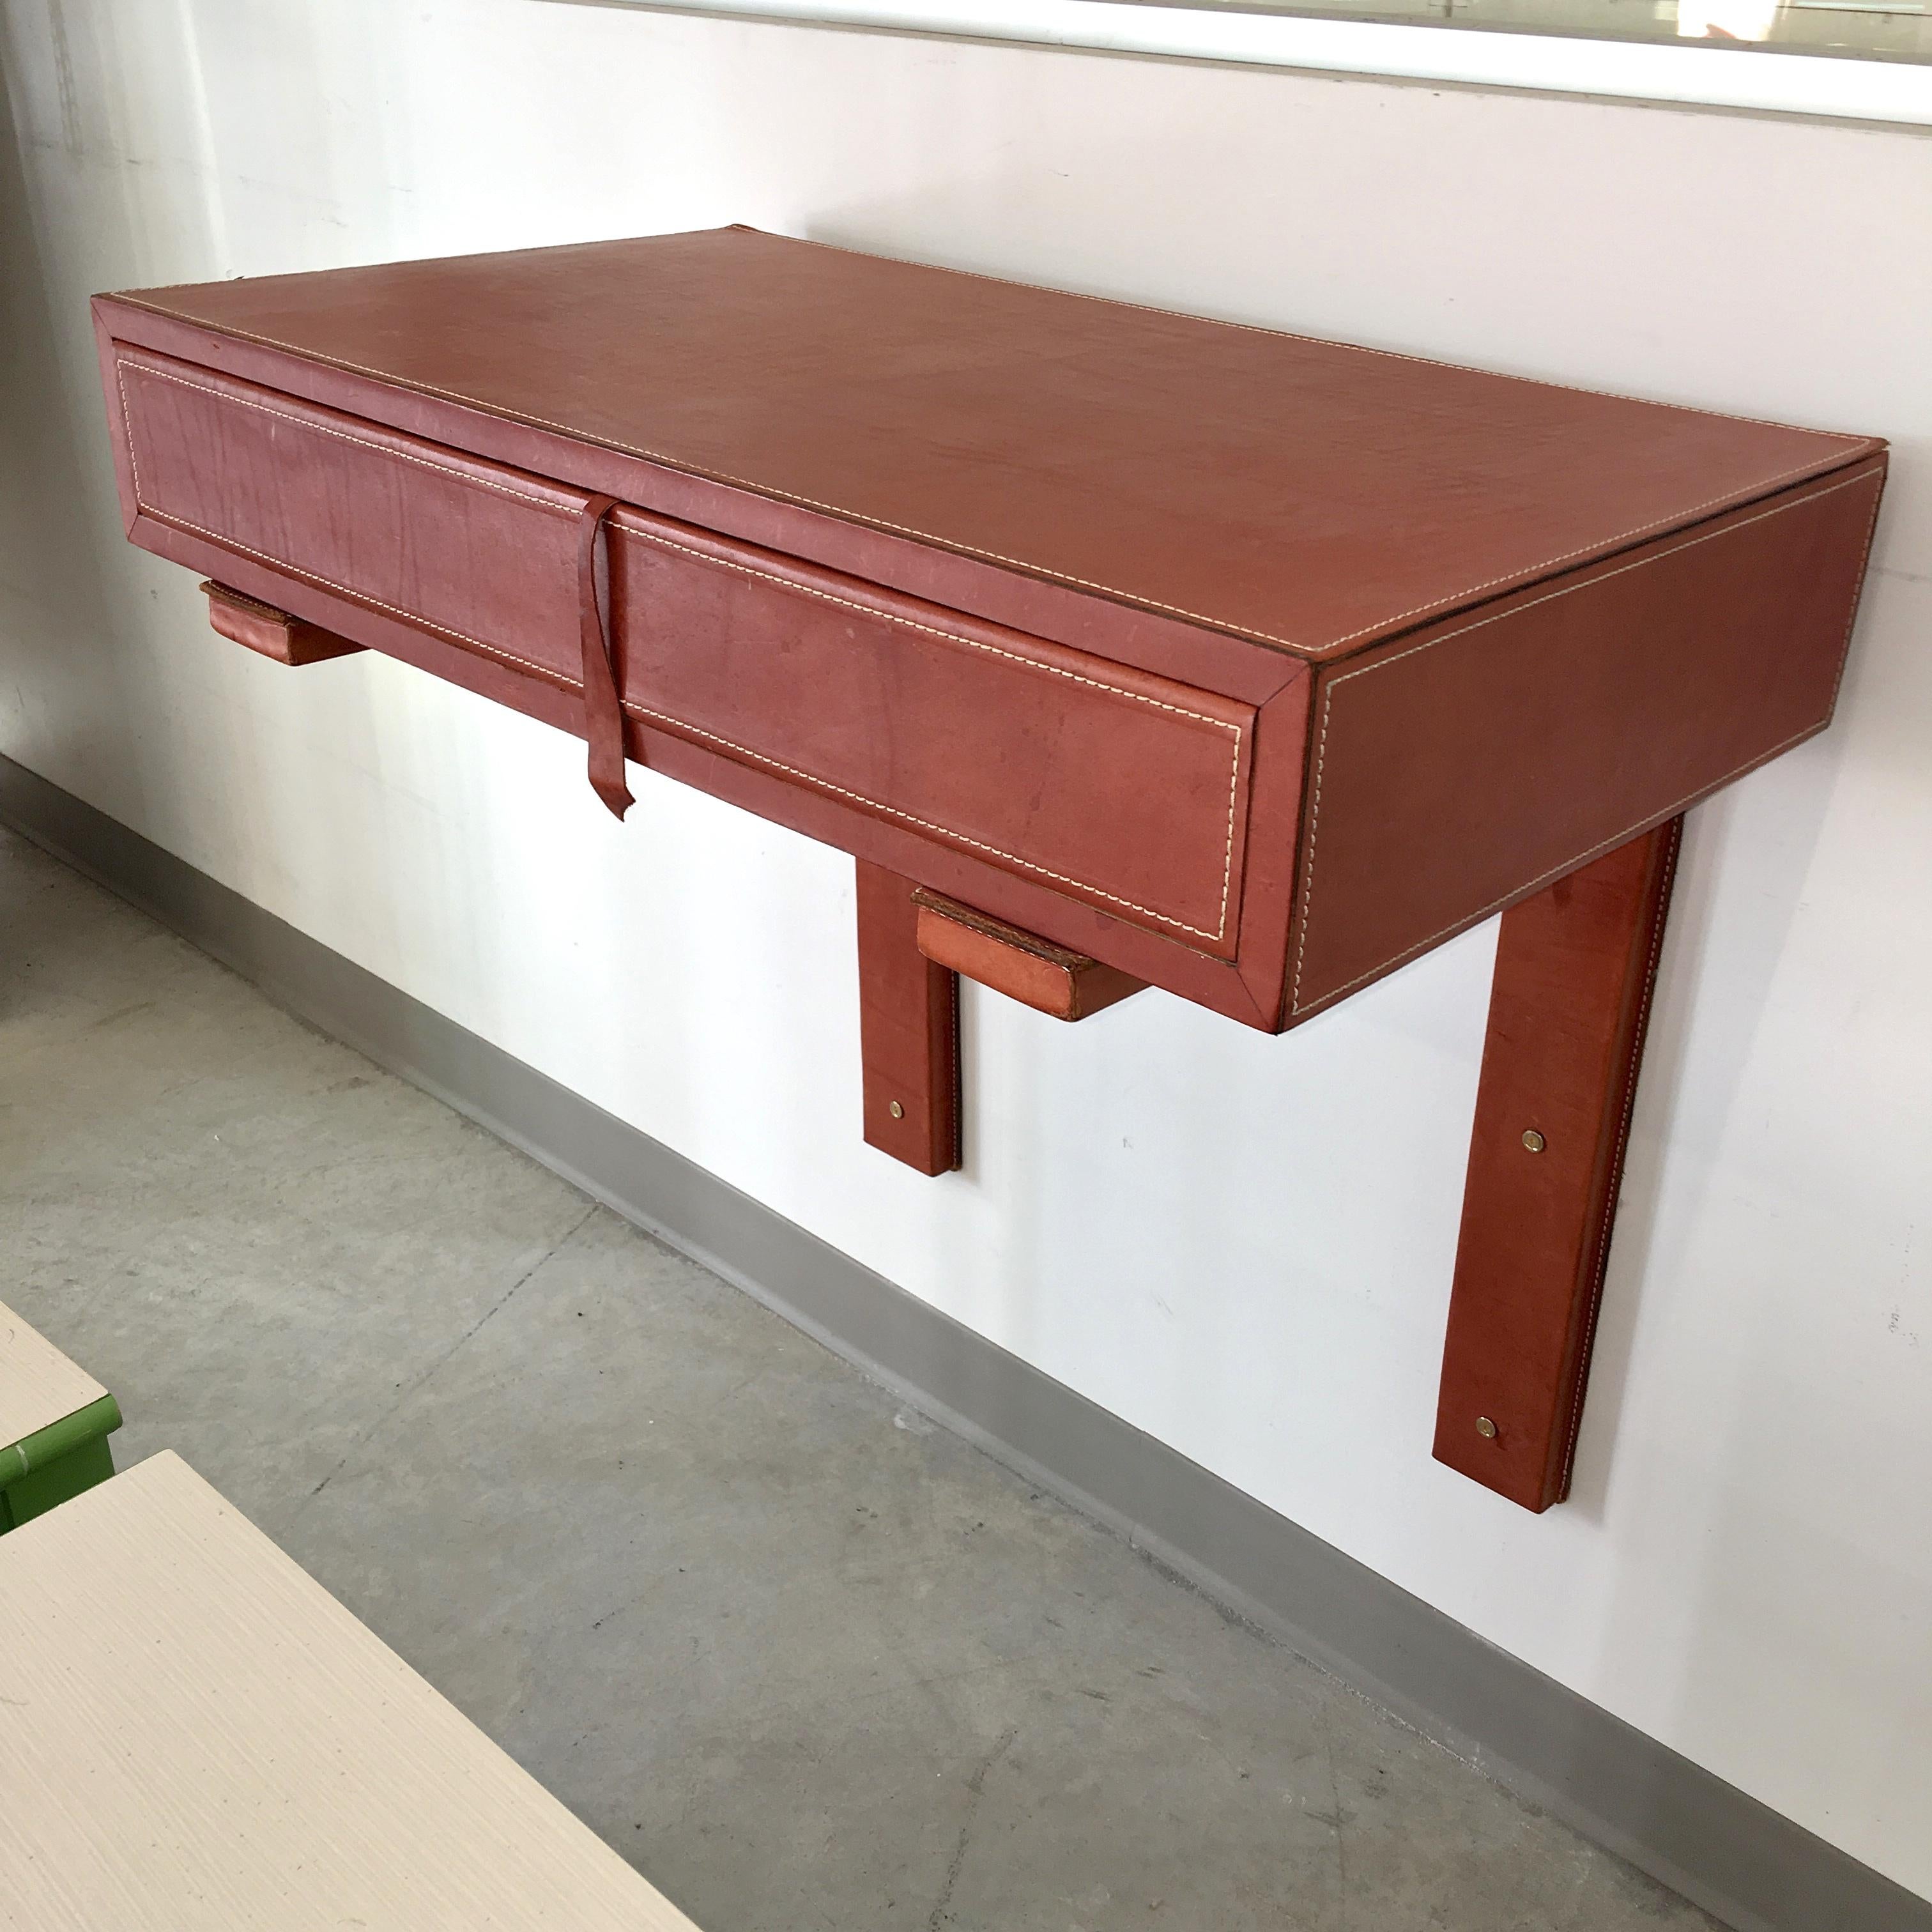 A wall console wrapped in saddle leather supported by two L shaped brackets with a top stitch detail in the manner of Jacques Adnet. One drawer with a piece of leather serving as the pull. Would serve well as a desk, or sideboard.

